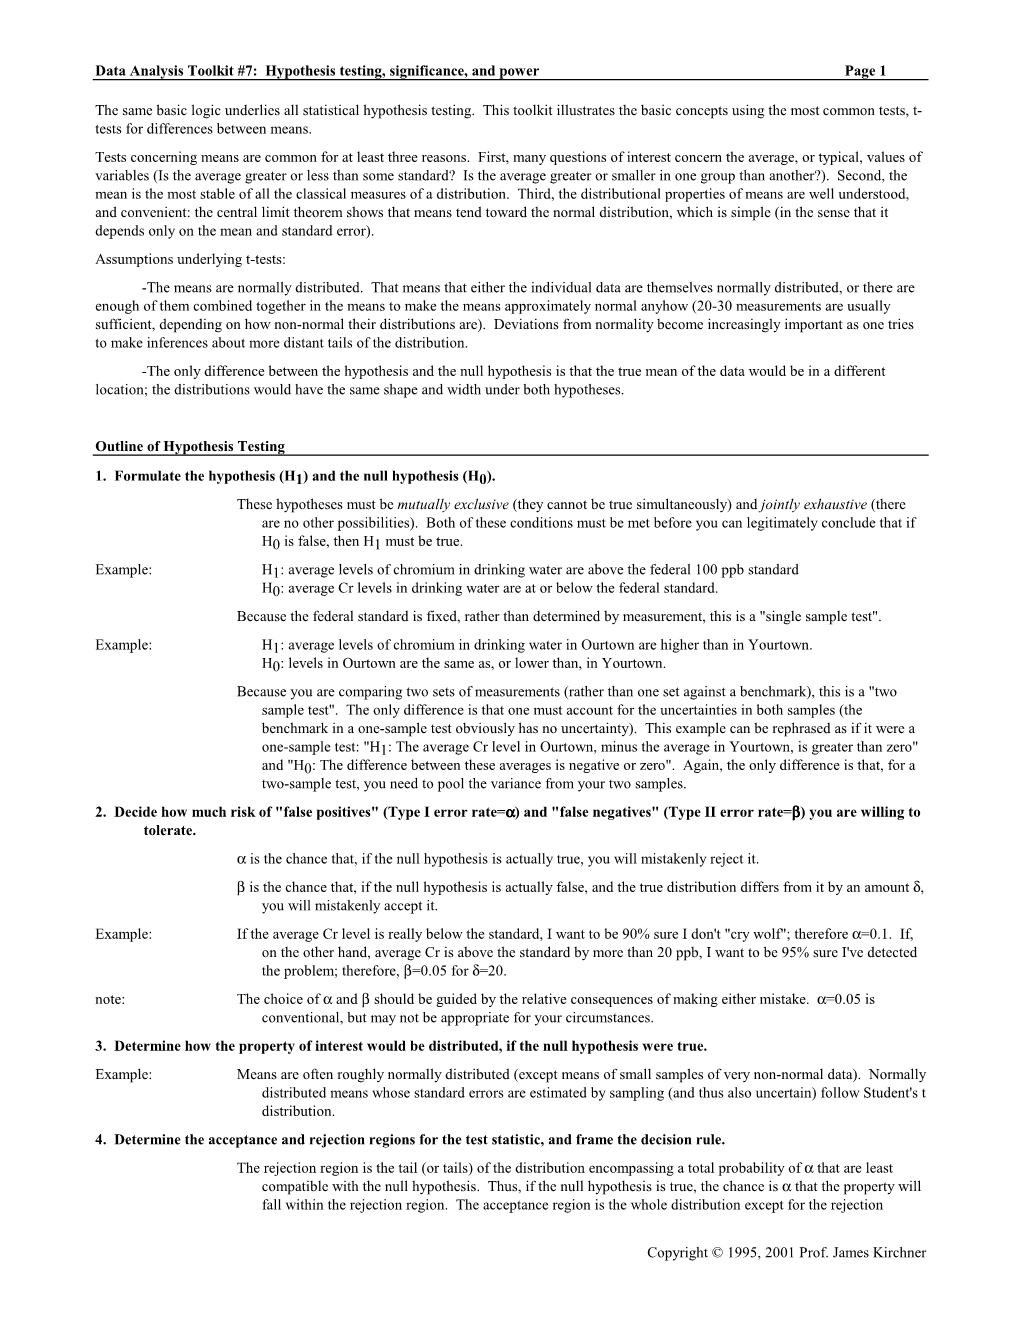 Data Analysis Toolkit #7: Hypothesis Testing, Significance, and Power Page 1